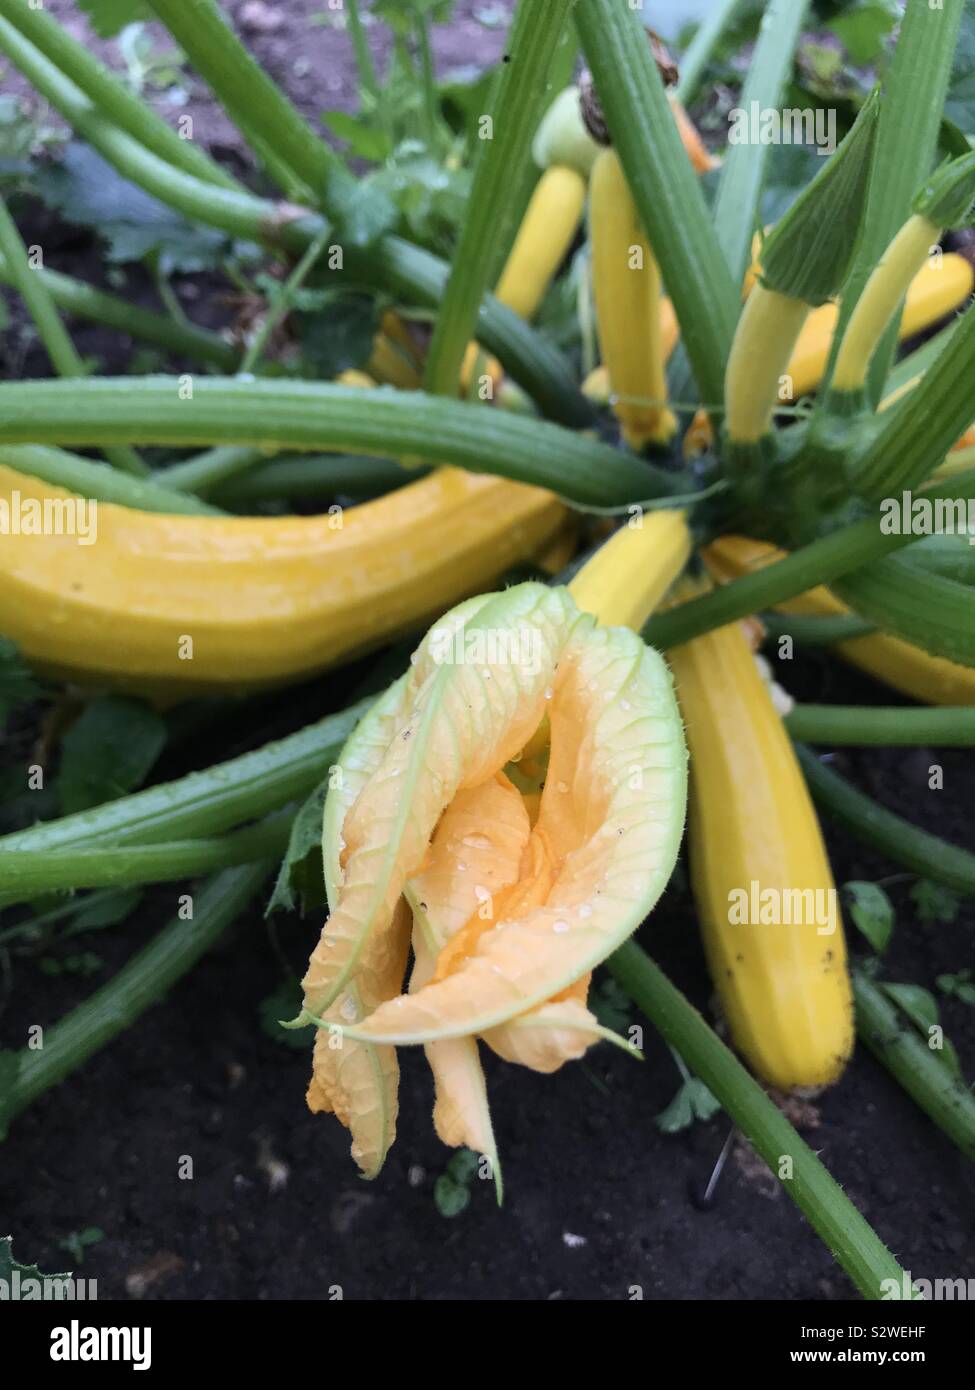 Courgette flowers Stock Photo